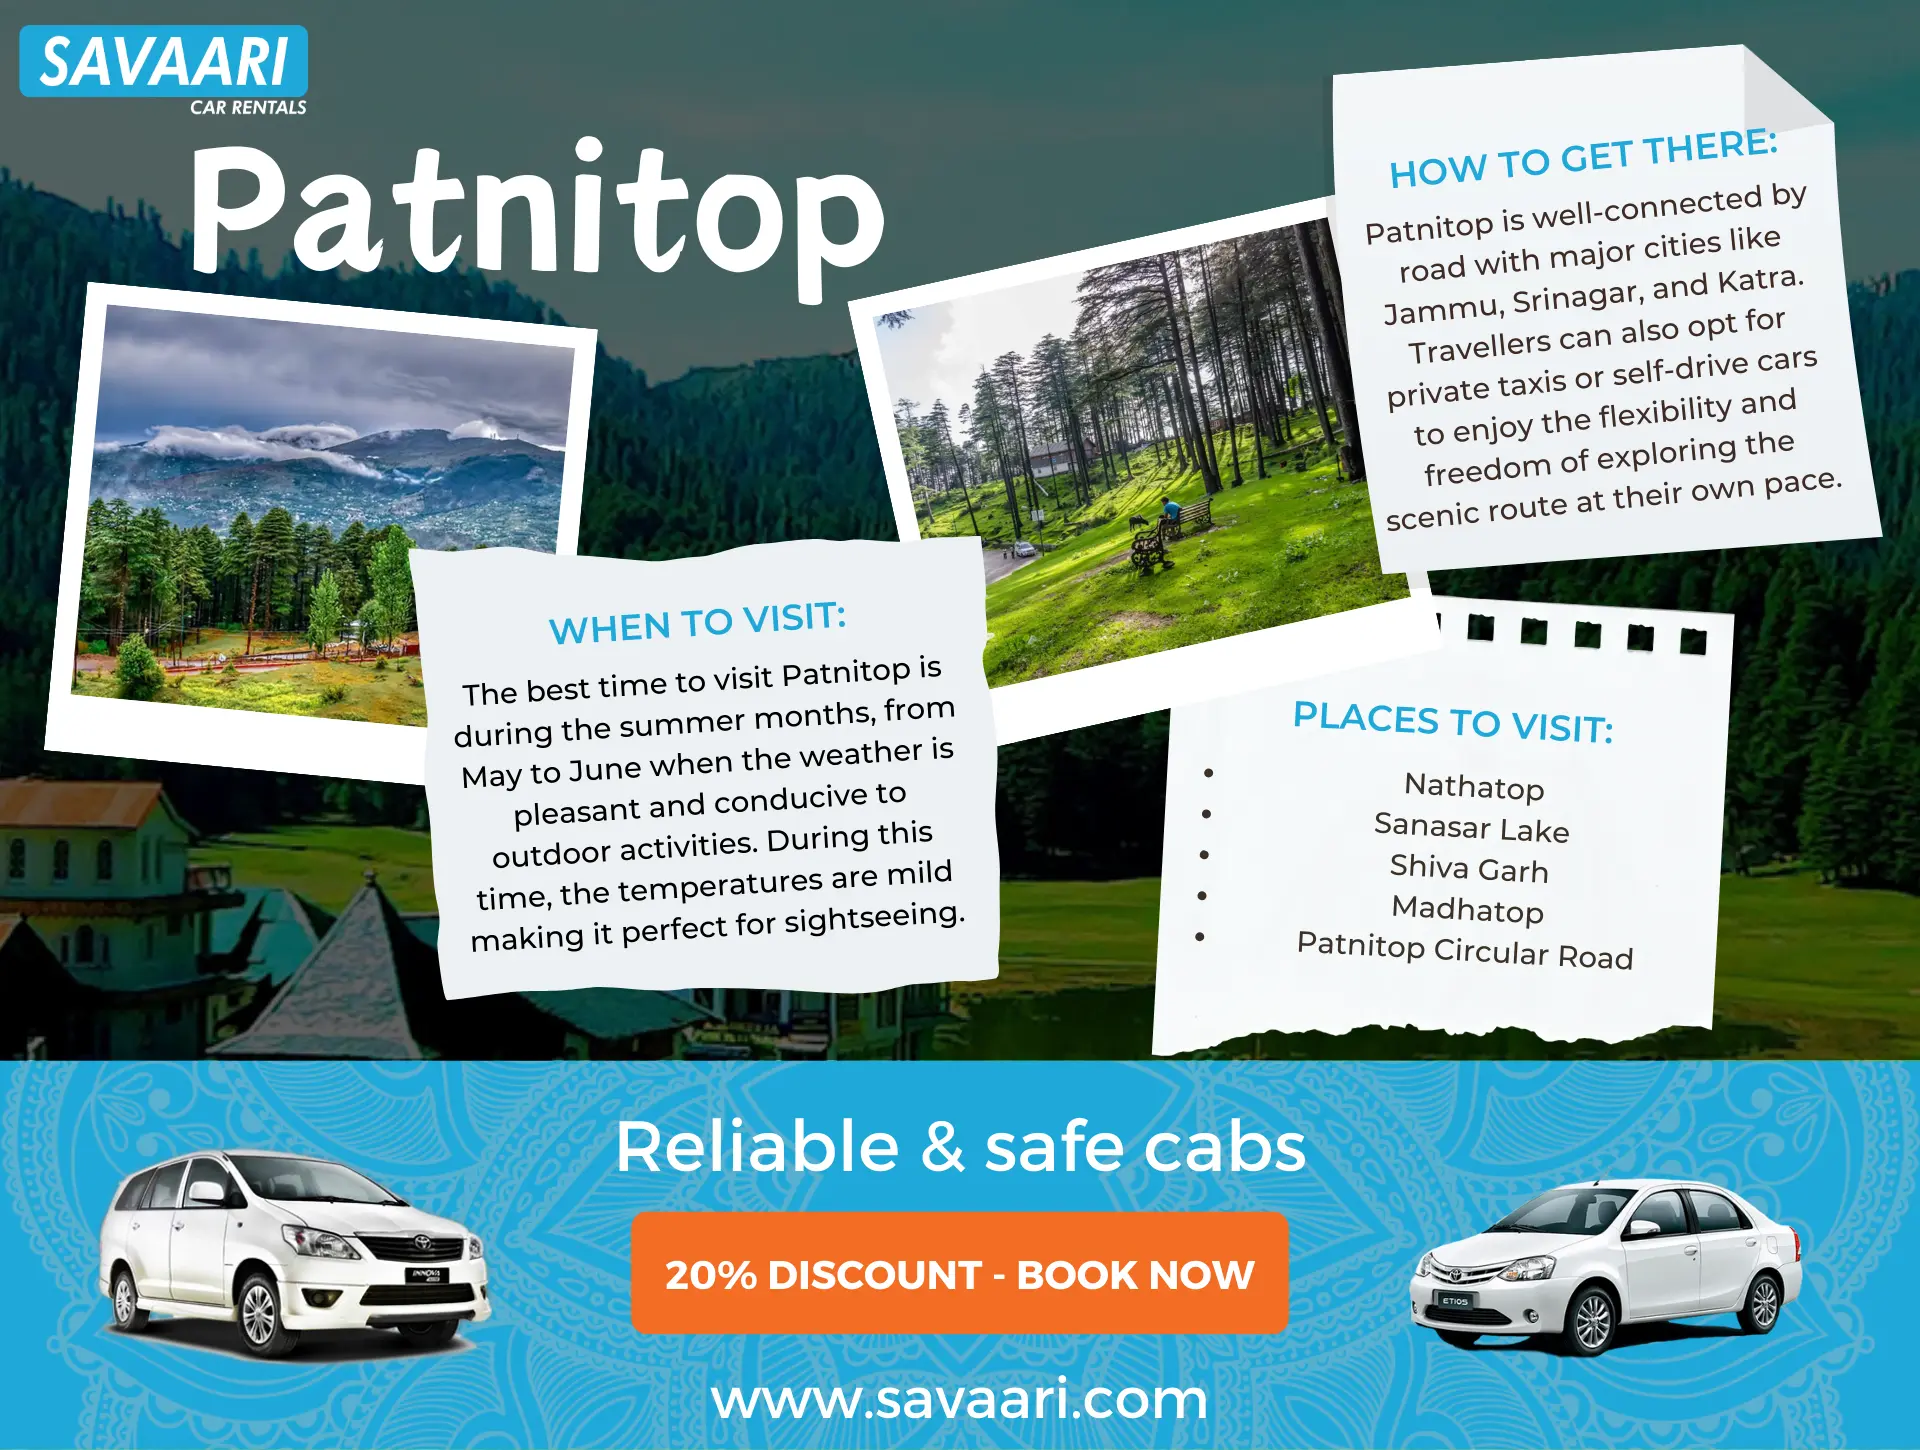 Things to do in Patnitop